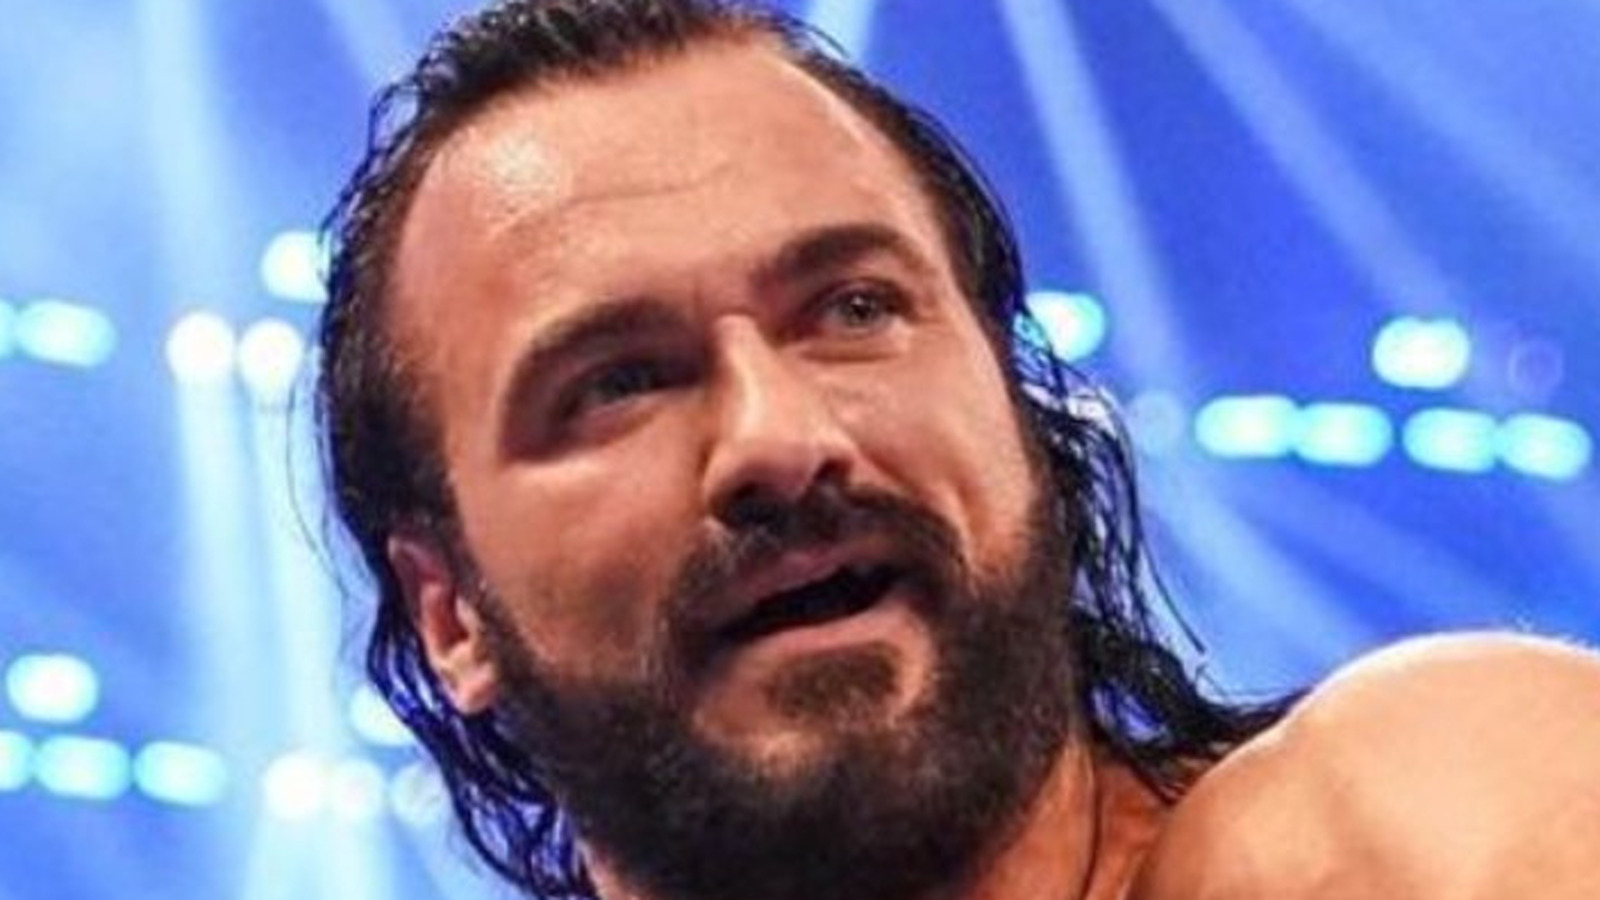 Drew McIntyre Would Love The Chance To Face This WWE Legend